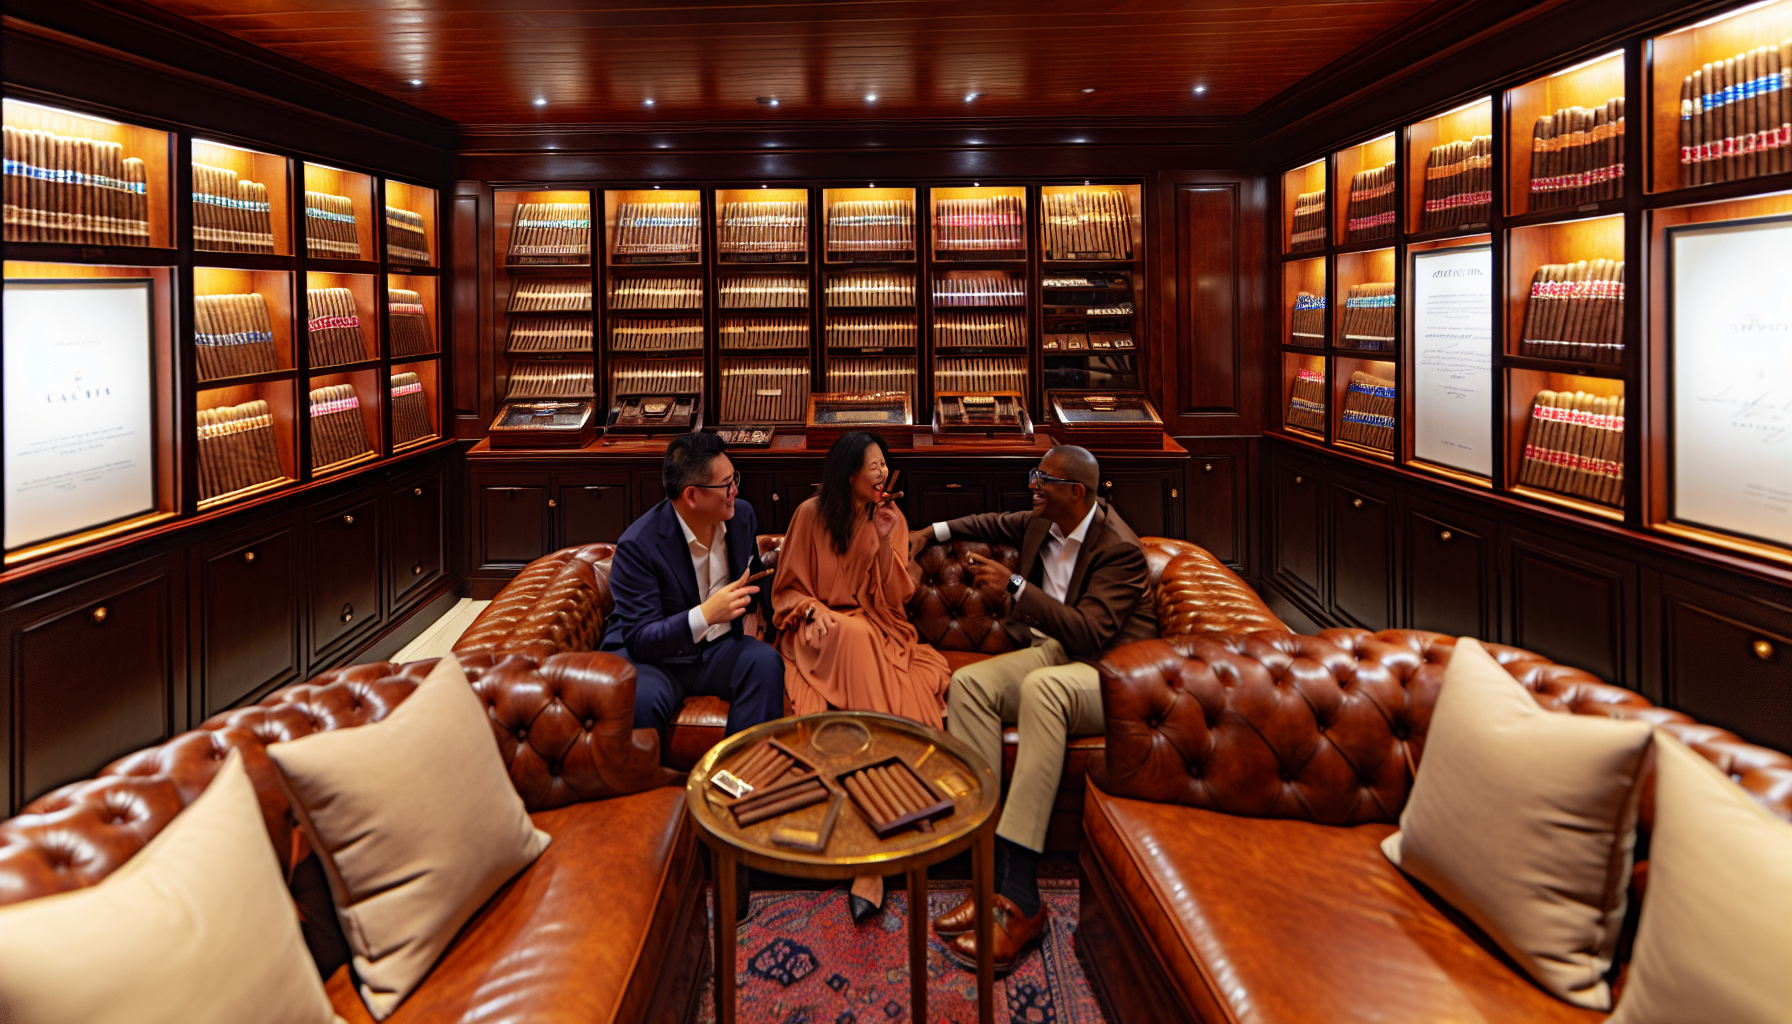 A private humidor and lounge area with plush leather sofas at a cigar establishment